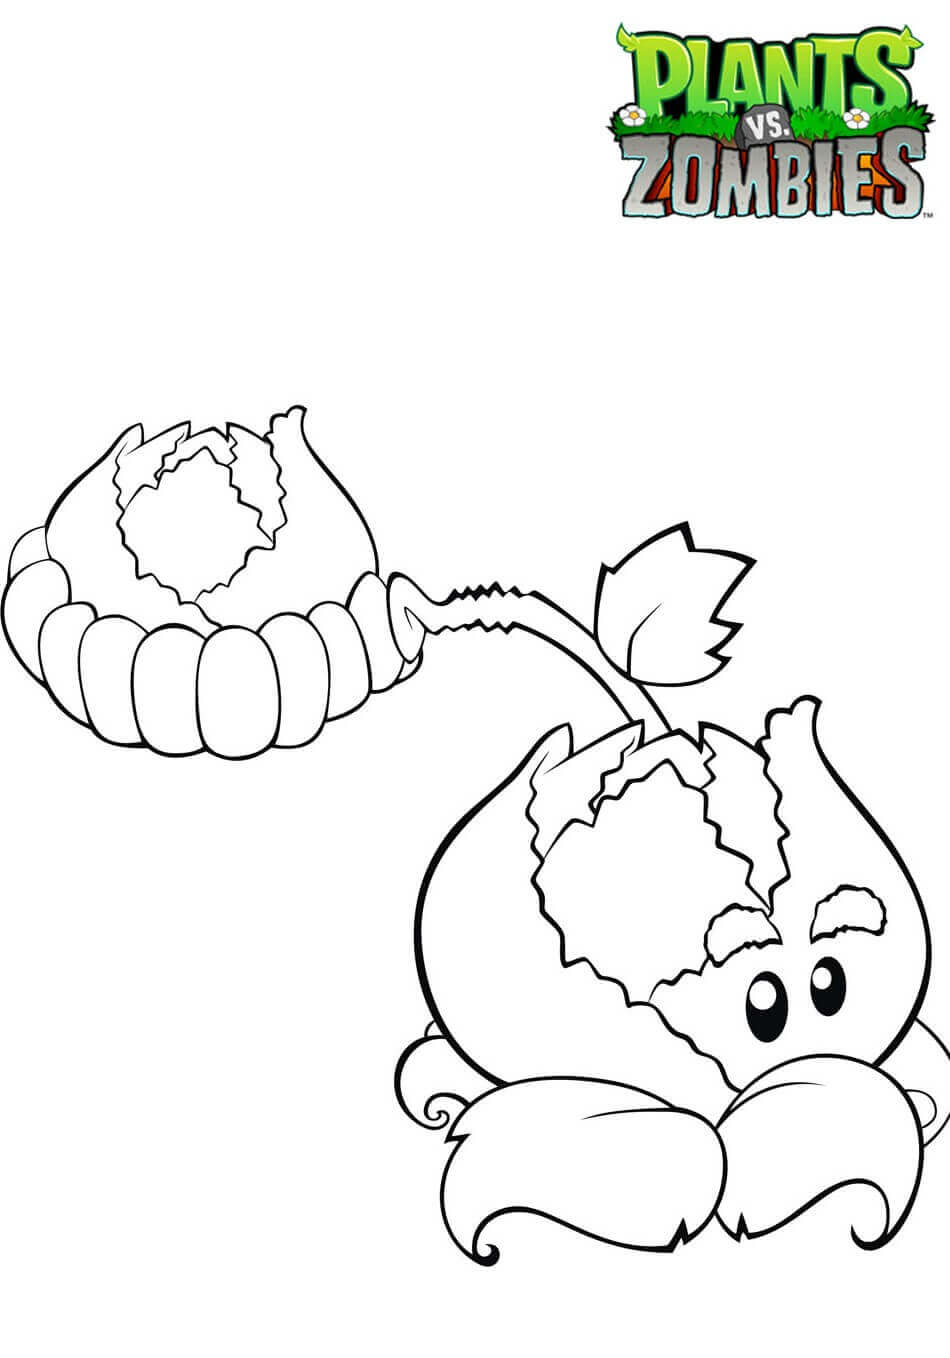 Cabbage From Plants Vs Zombies Coloring Page